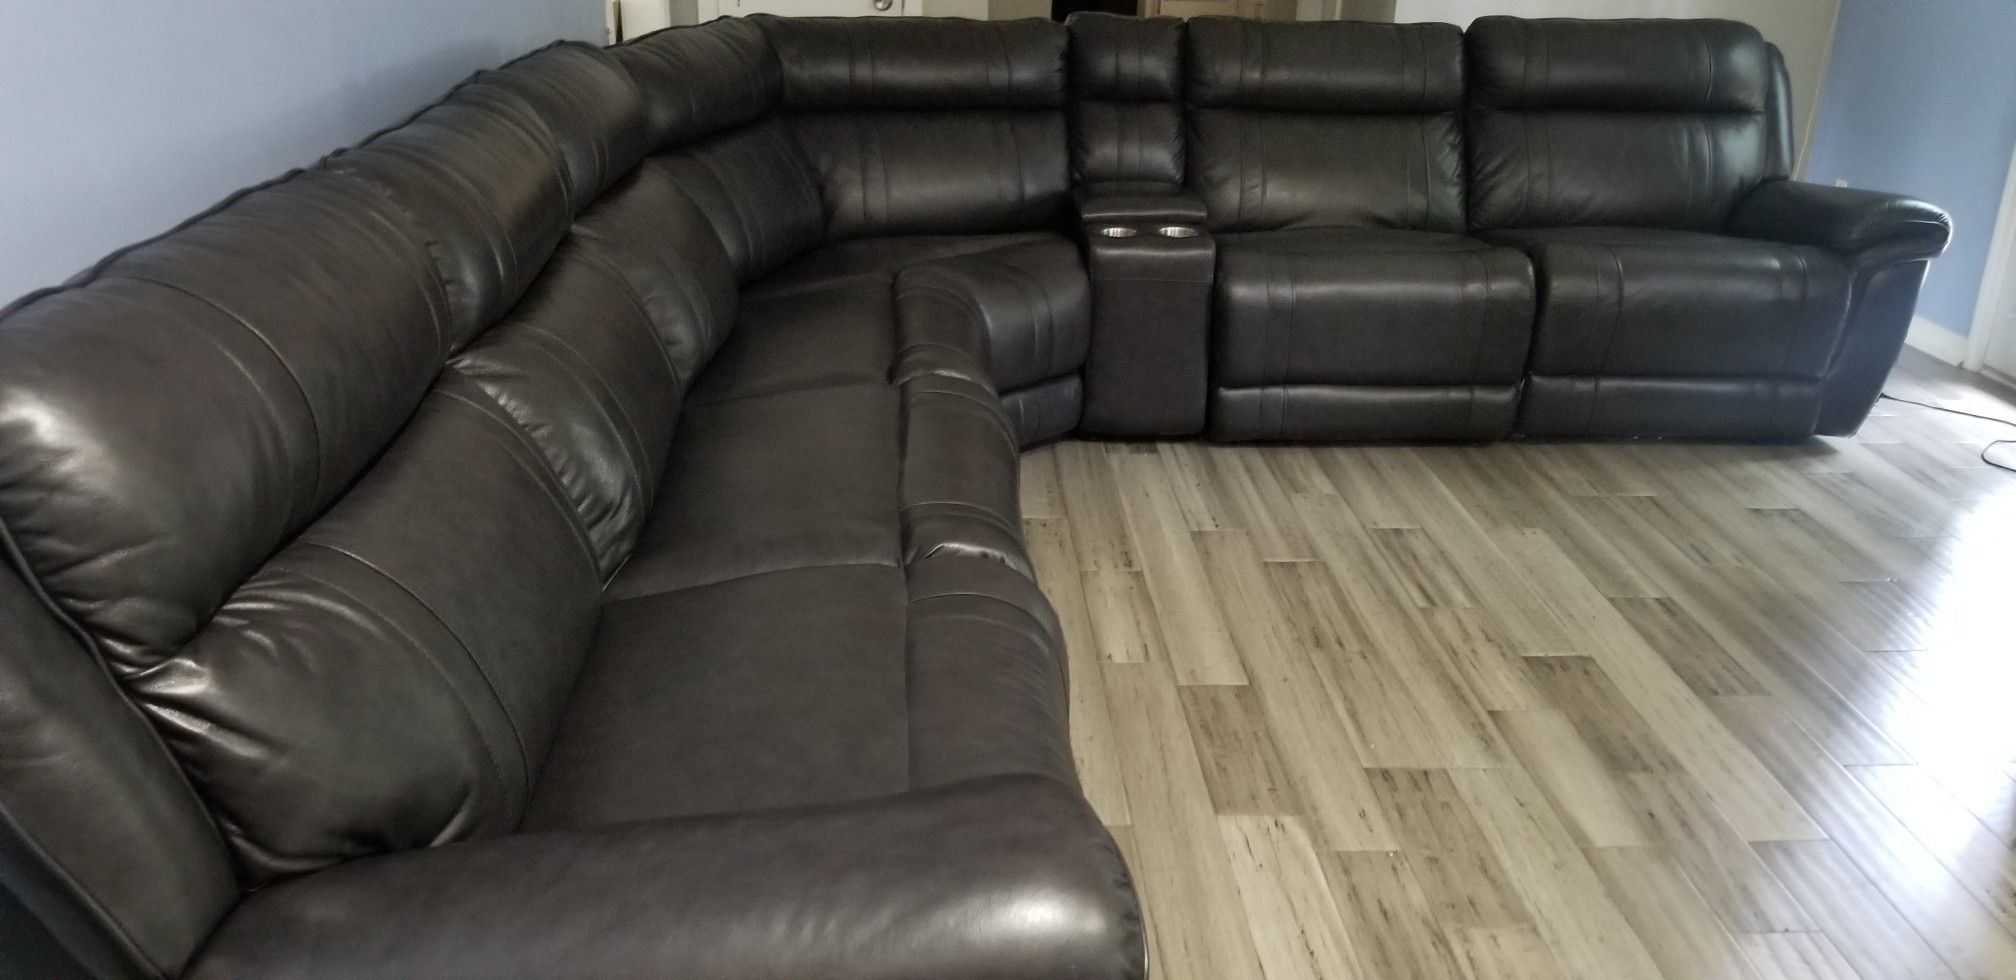 Large sectional leather/lounging couch $1450